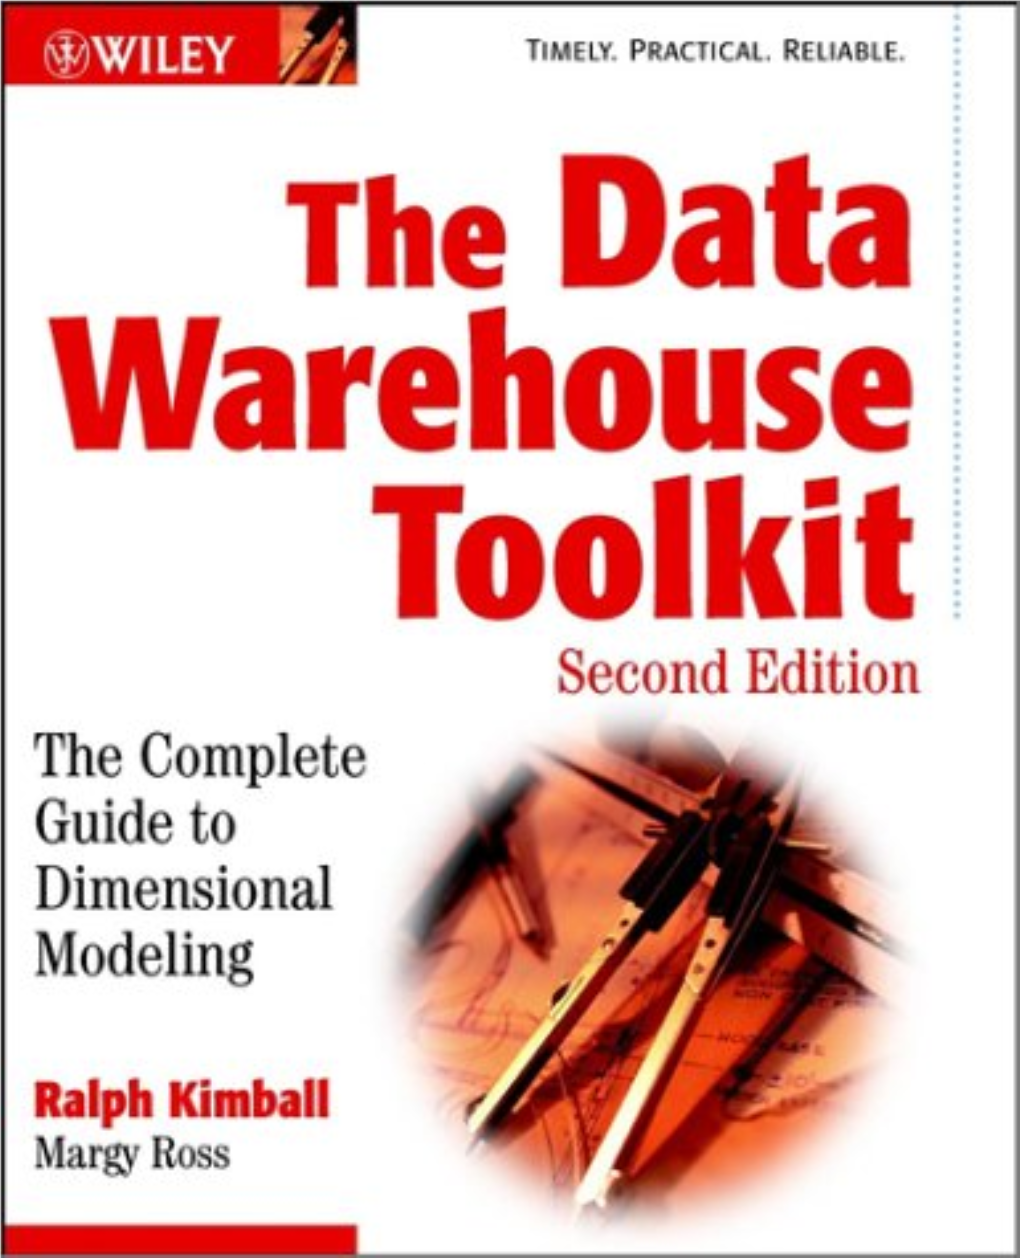 The Data Warehouse Toolkit Second Edition